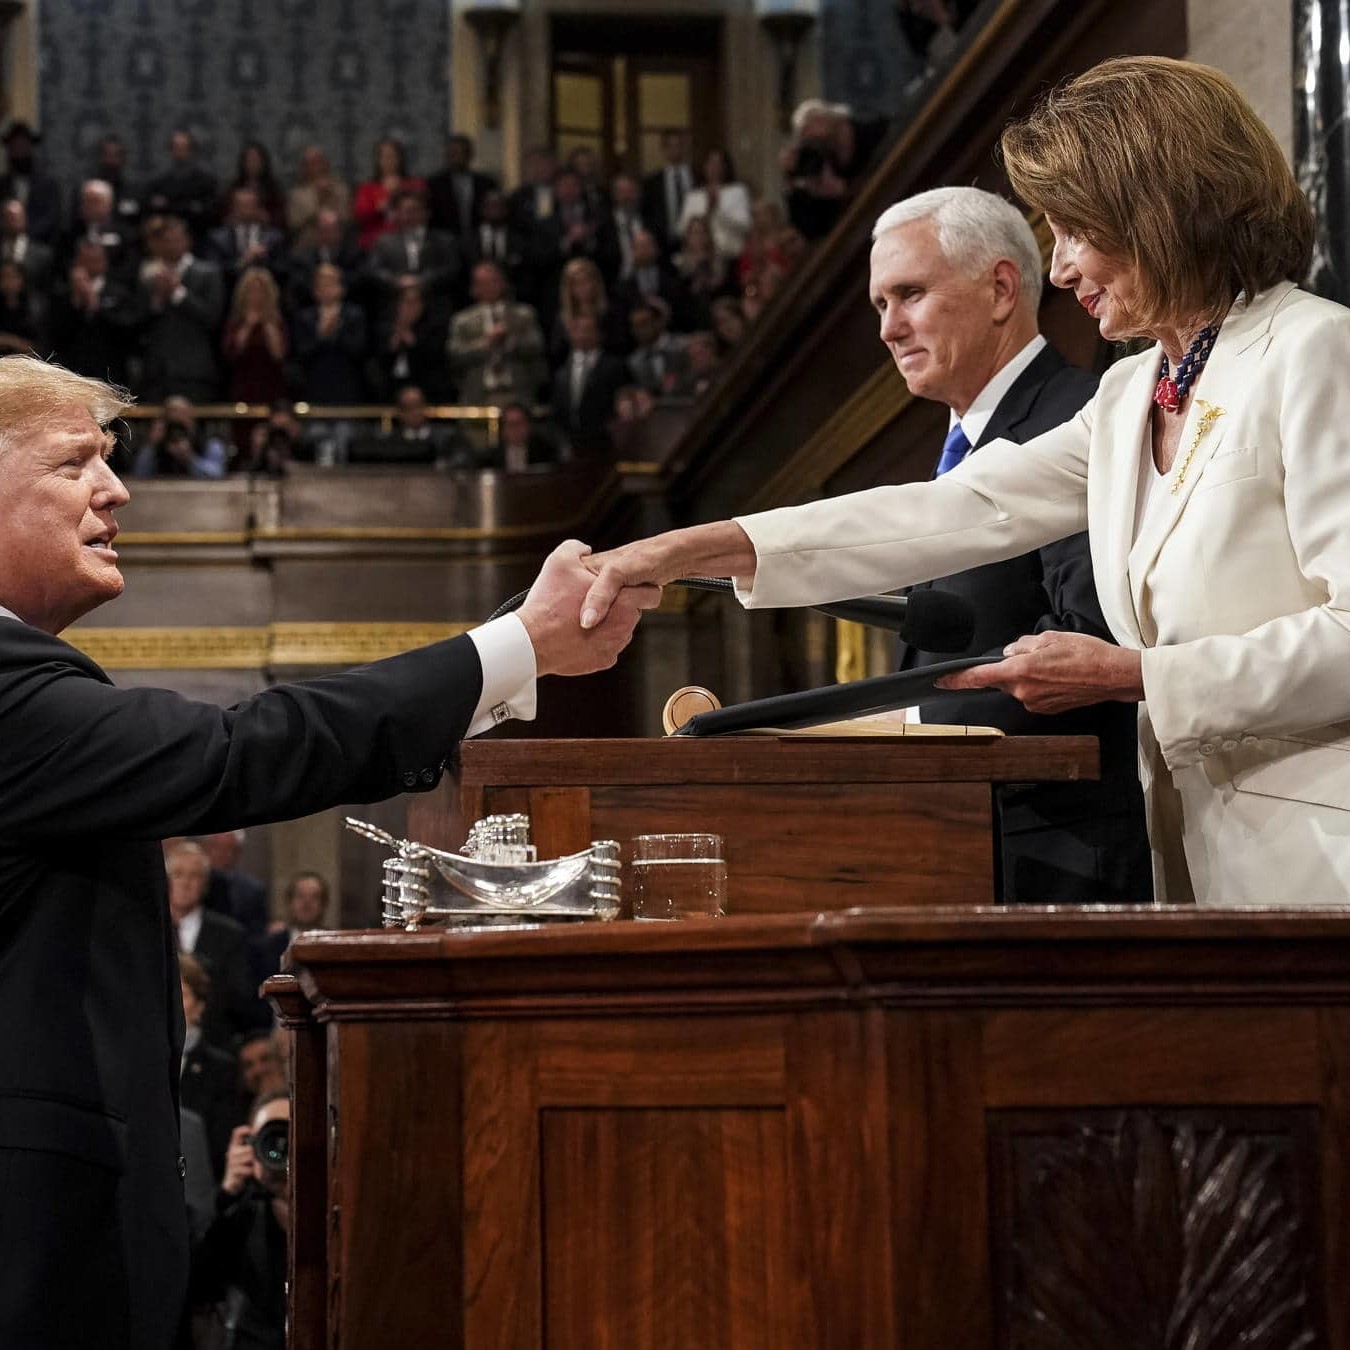 What matters most in the battle between Trump and Pelosi